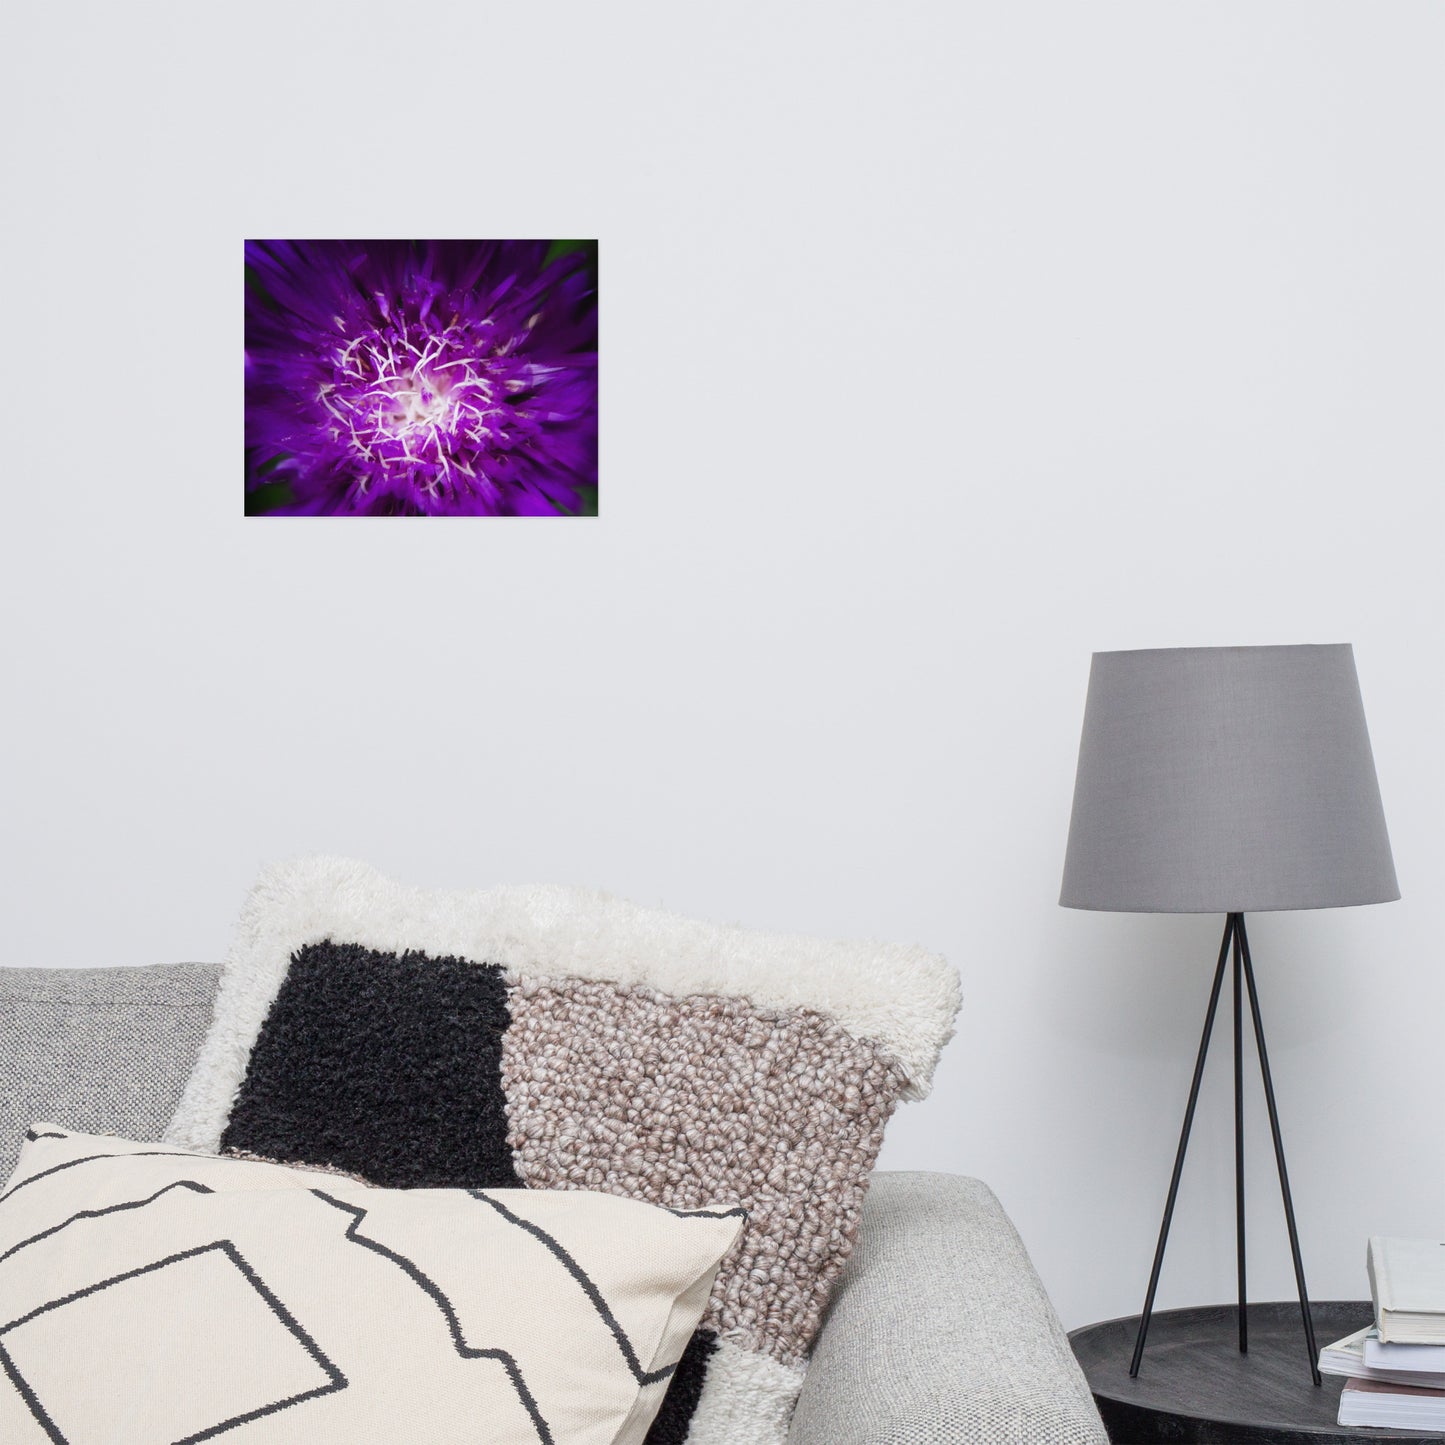 Nature Pictures For Living Room: Dark Purple and White Aster Bloom Close-up - Botanical / Floral / Flora / Flowers / Nature Photograph Loose / Unframed / Frameless / Frameable Wall Art Print - Artwork